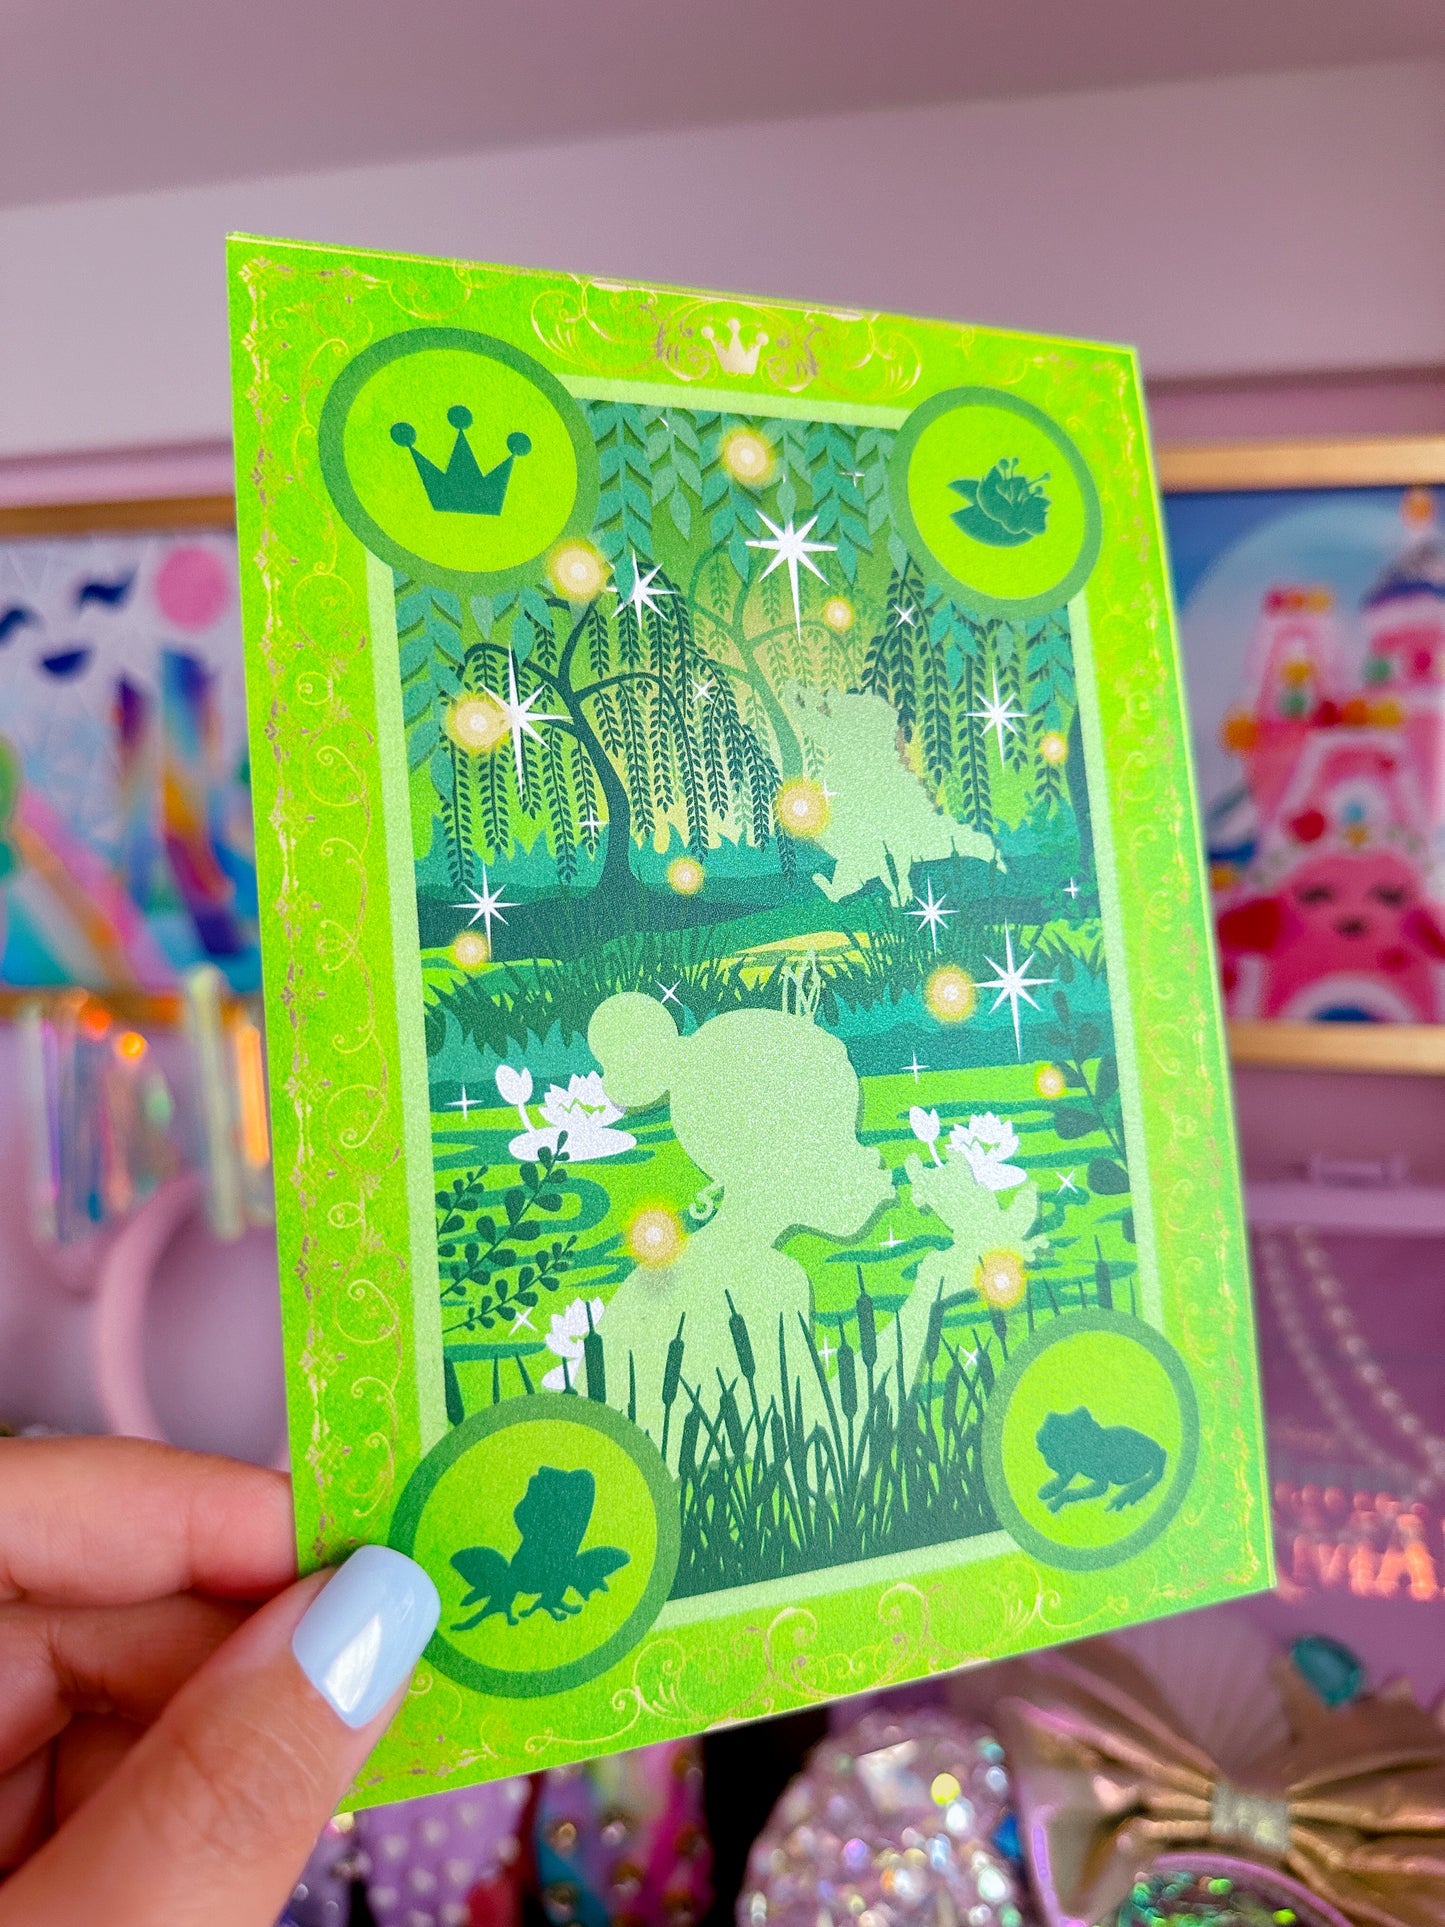 5x7 Pearlescent Art Card - Storybook Cover (Tiana)